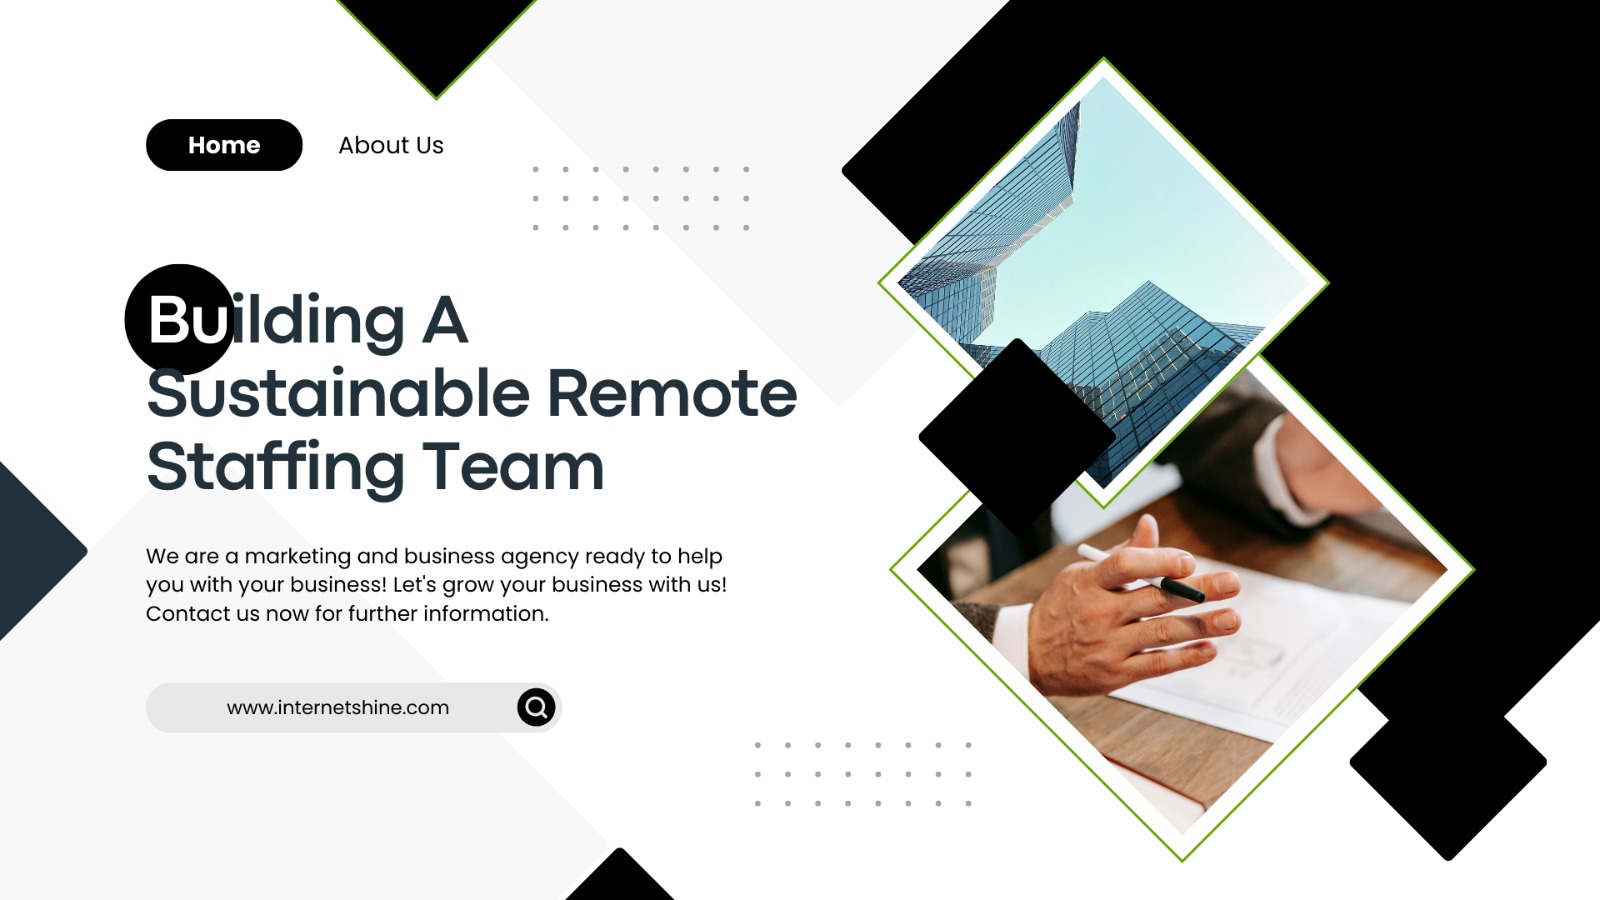 Building A Sustainable Remote Staffing Team